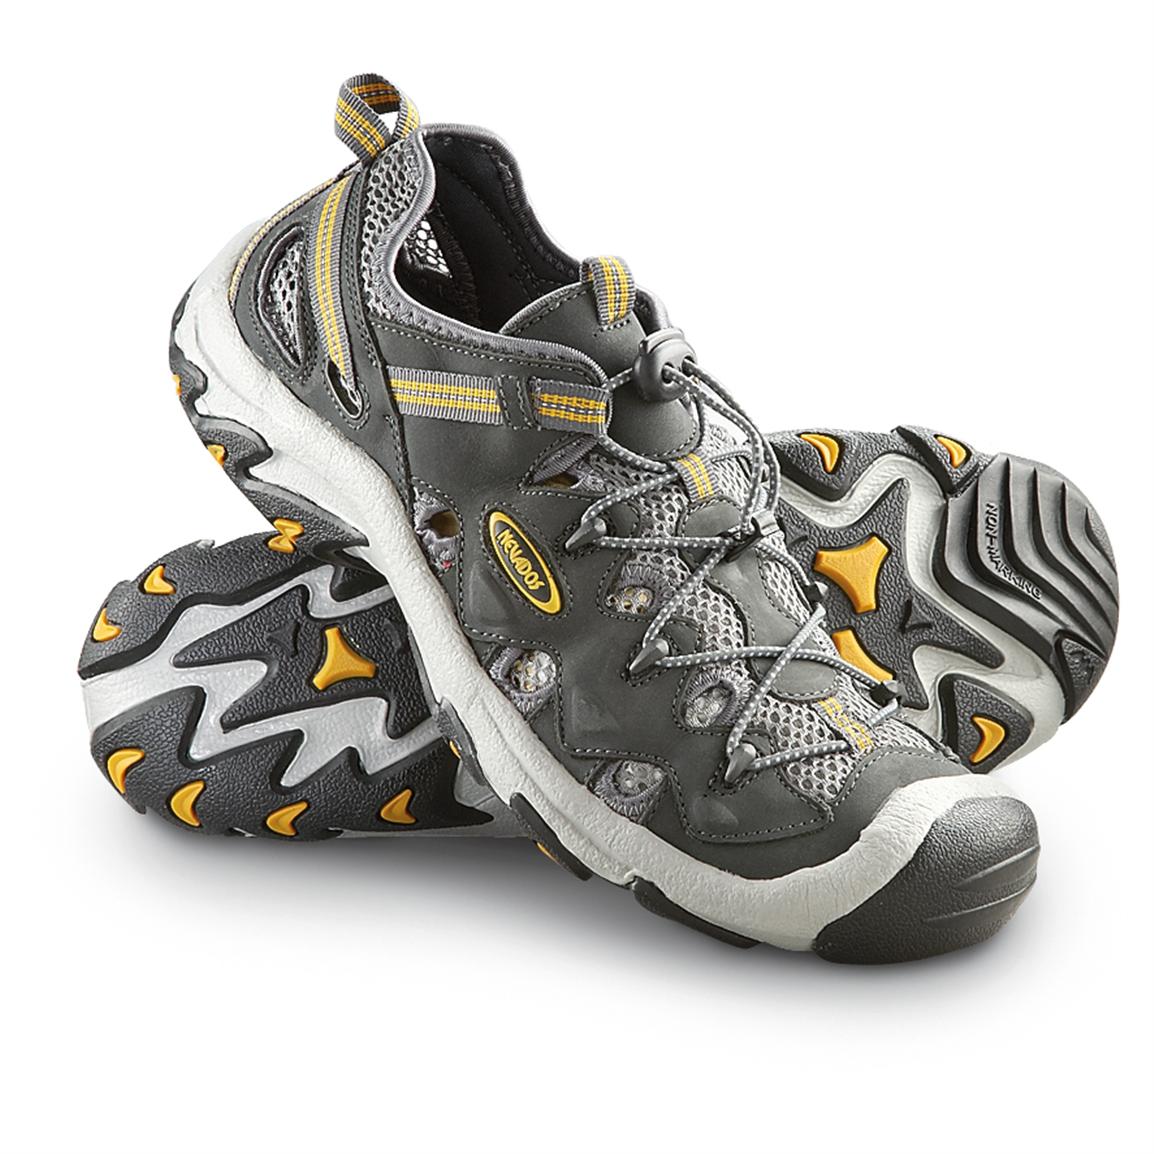 Men's Nevados® Yahara Trail Sandals, Gray / Yellow - 177863, Sandals